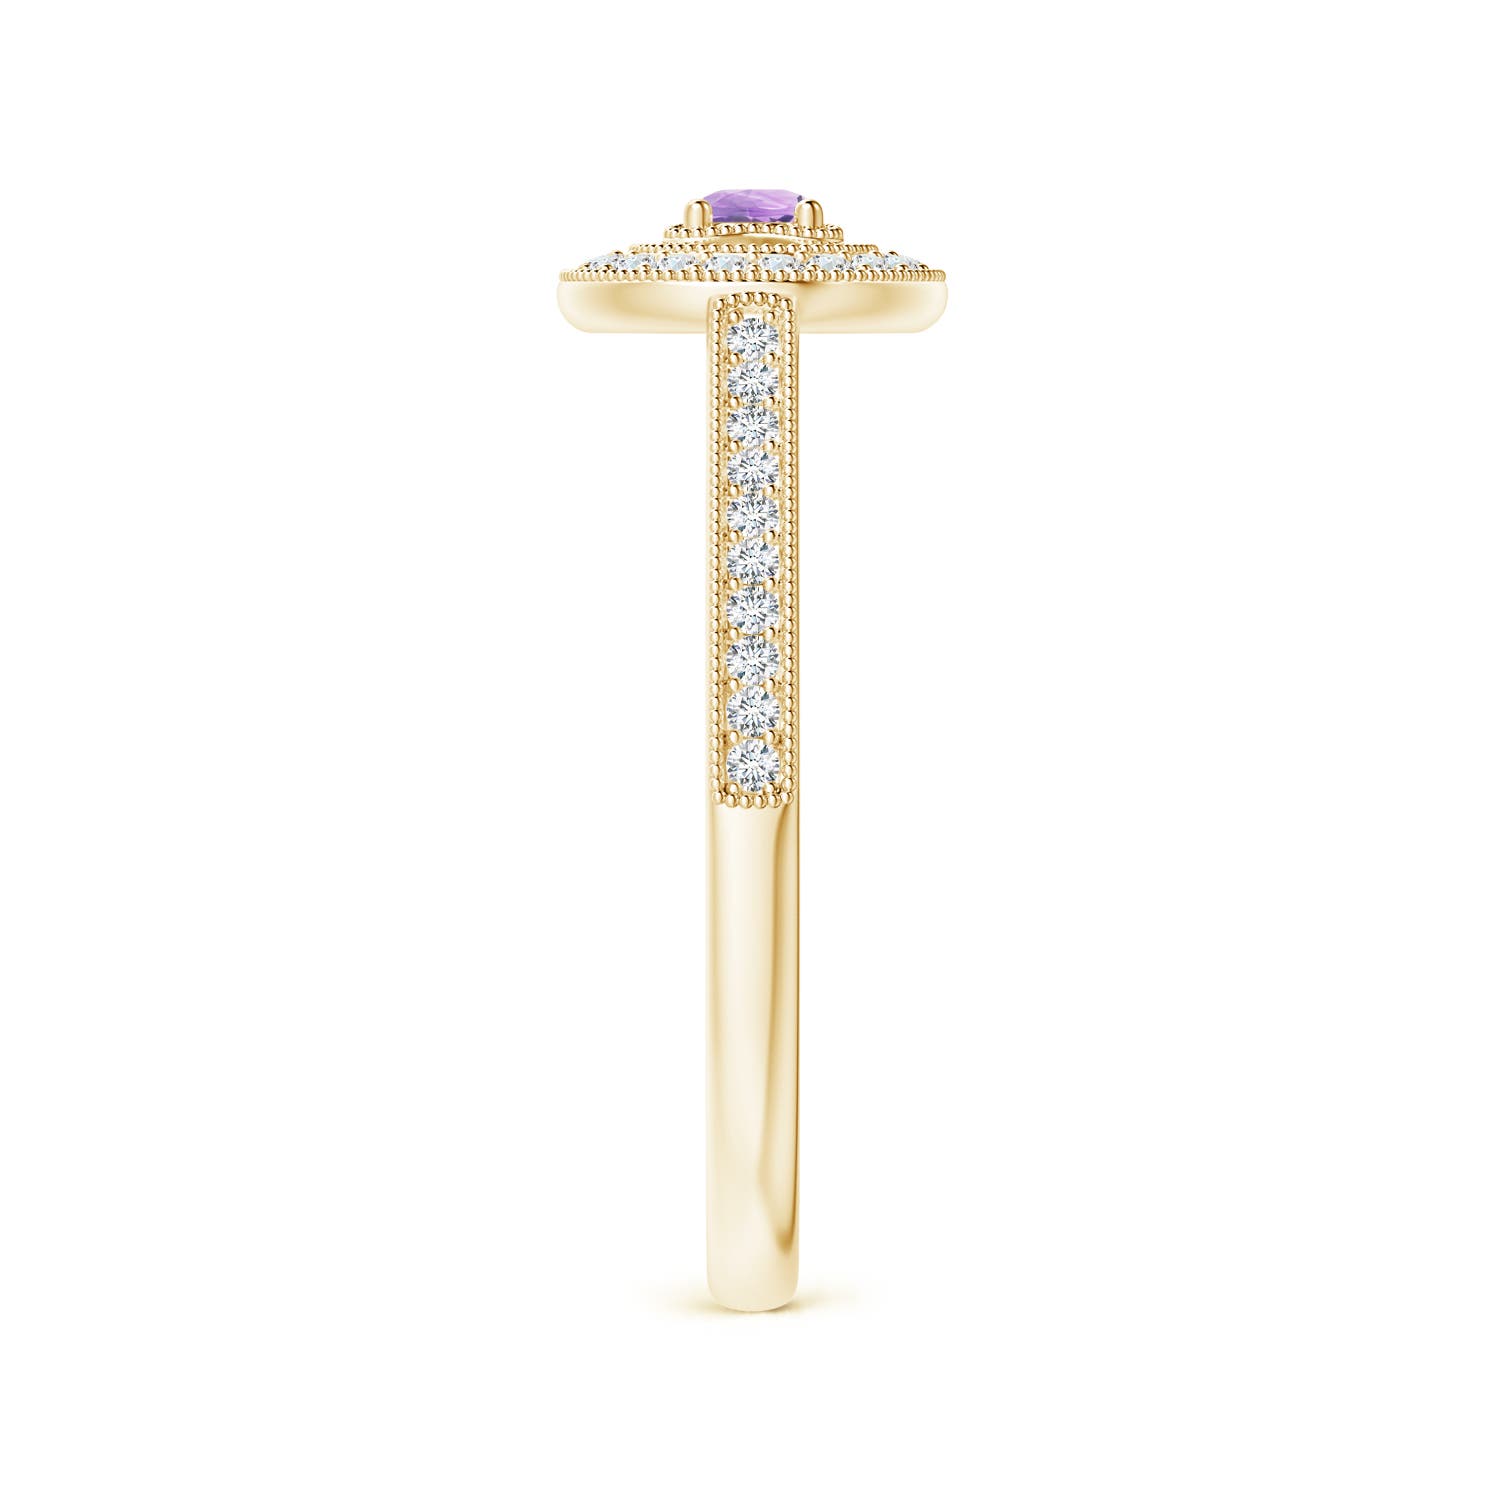 A - Amethyst / 0.31 CT / 14 KT Yellow Gold